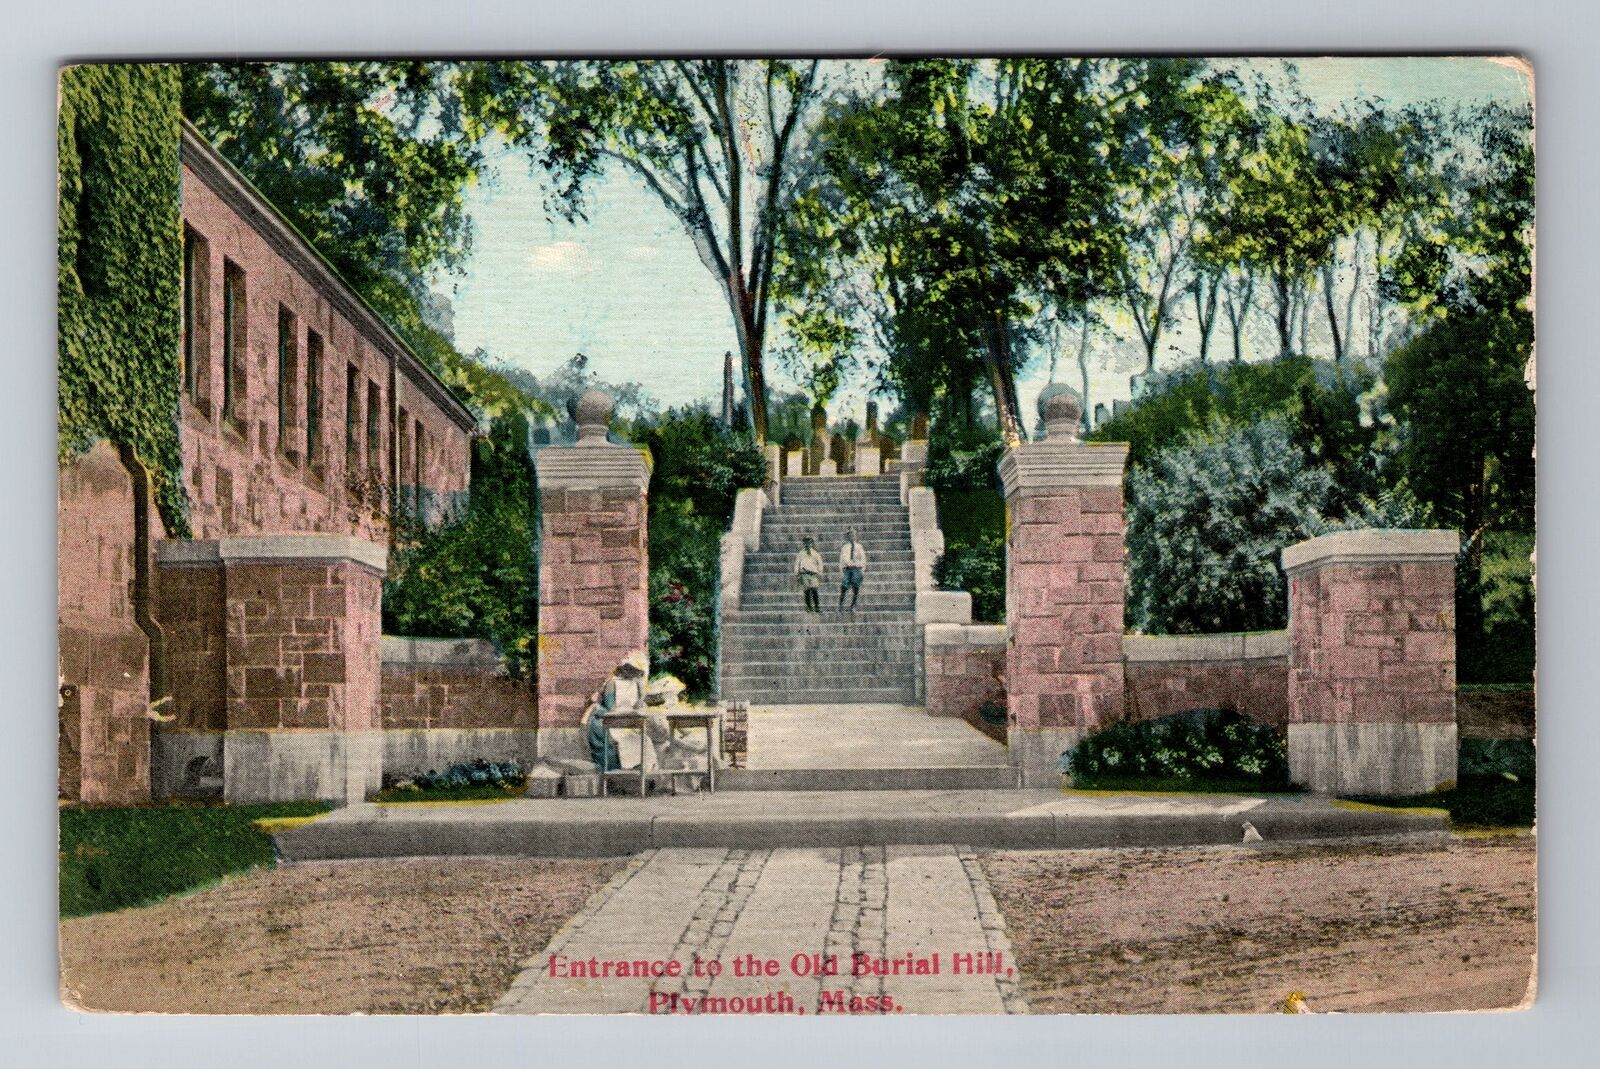 Plymouth MA-Massachusetts, Entrance to Old Burial Hill, Antique Vintage Postcard